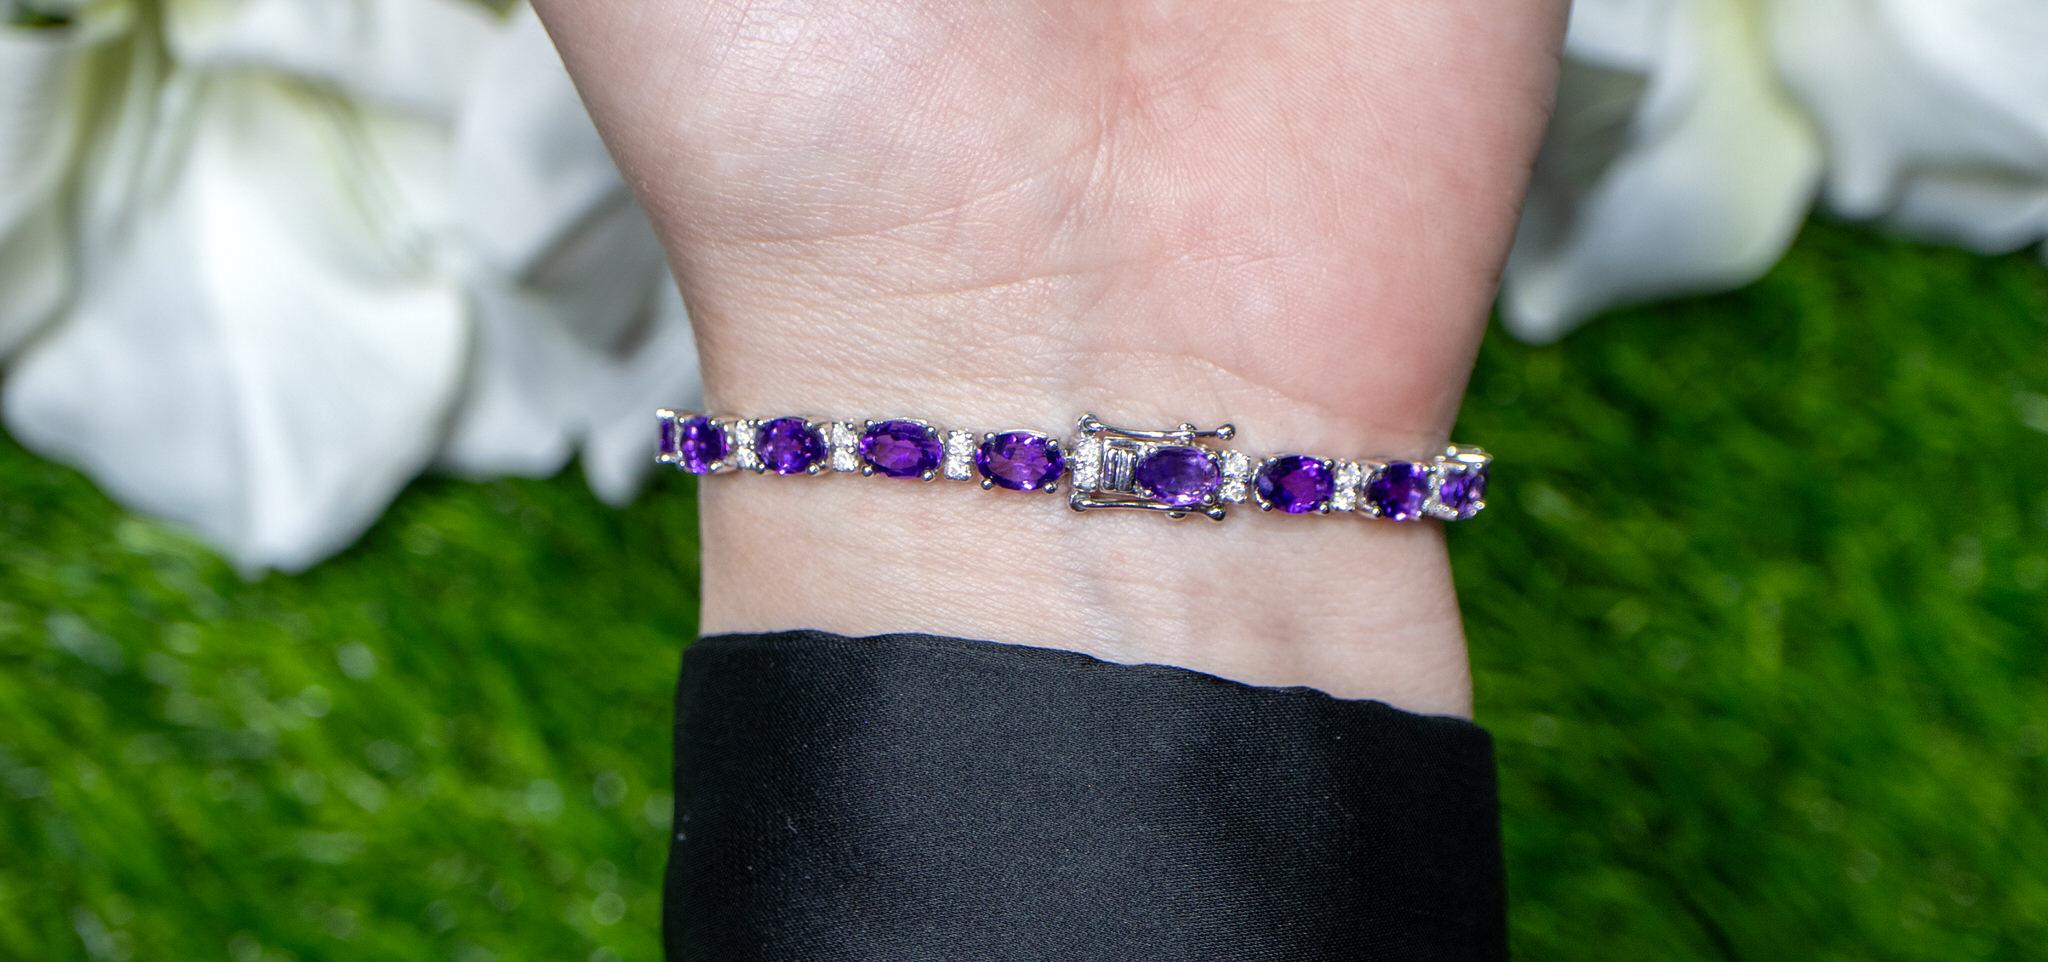 Amethyst Bracelet Diamond Links 10.3 Carats 18K Gold In Excellent Condition For Sale In Laguna Niguel, CA